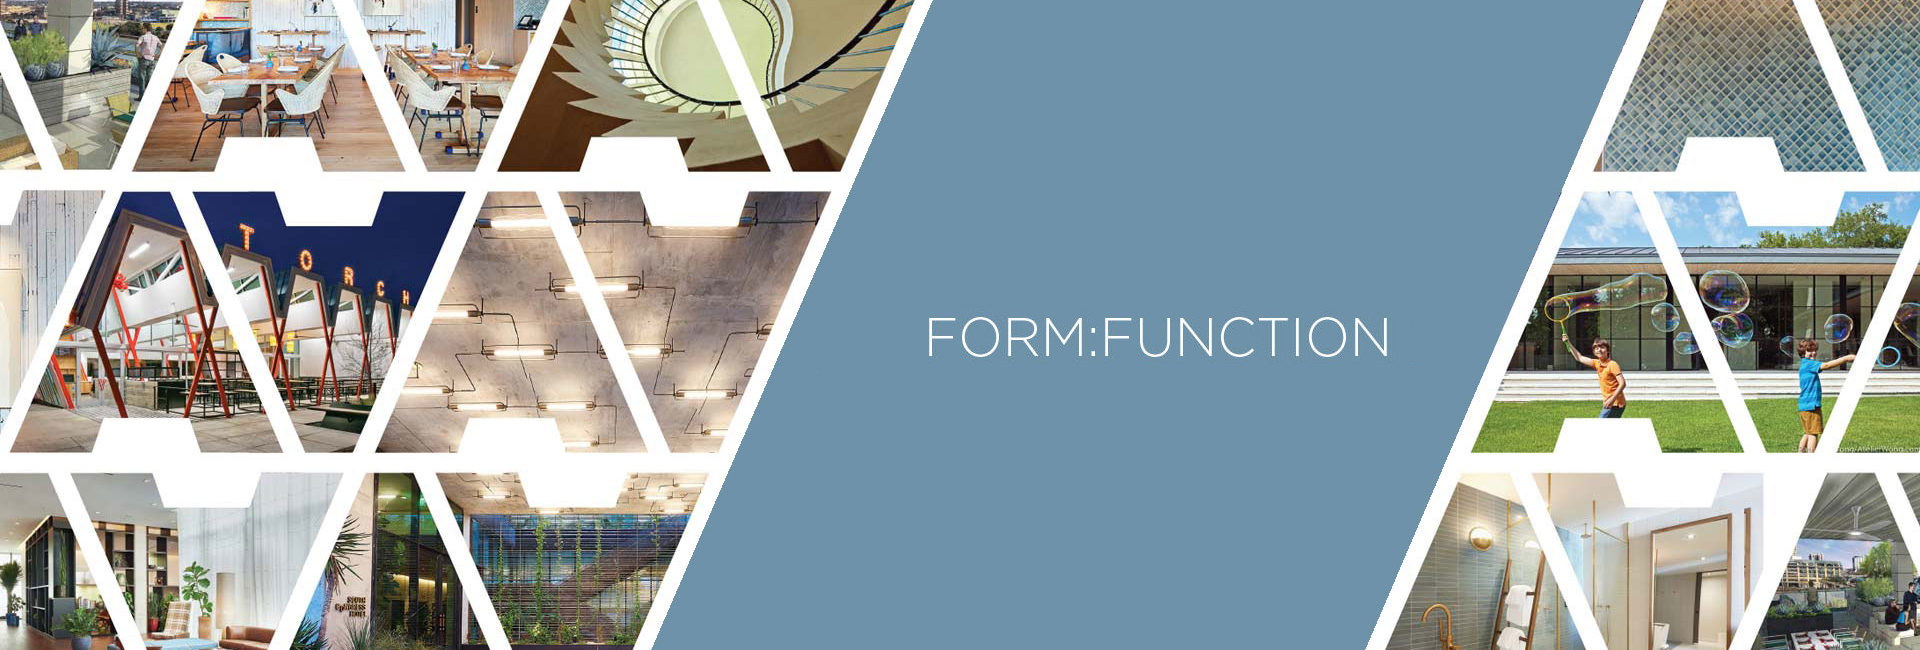 Austin Foundation for Architecture - Form:Function